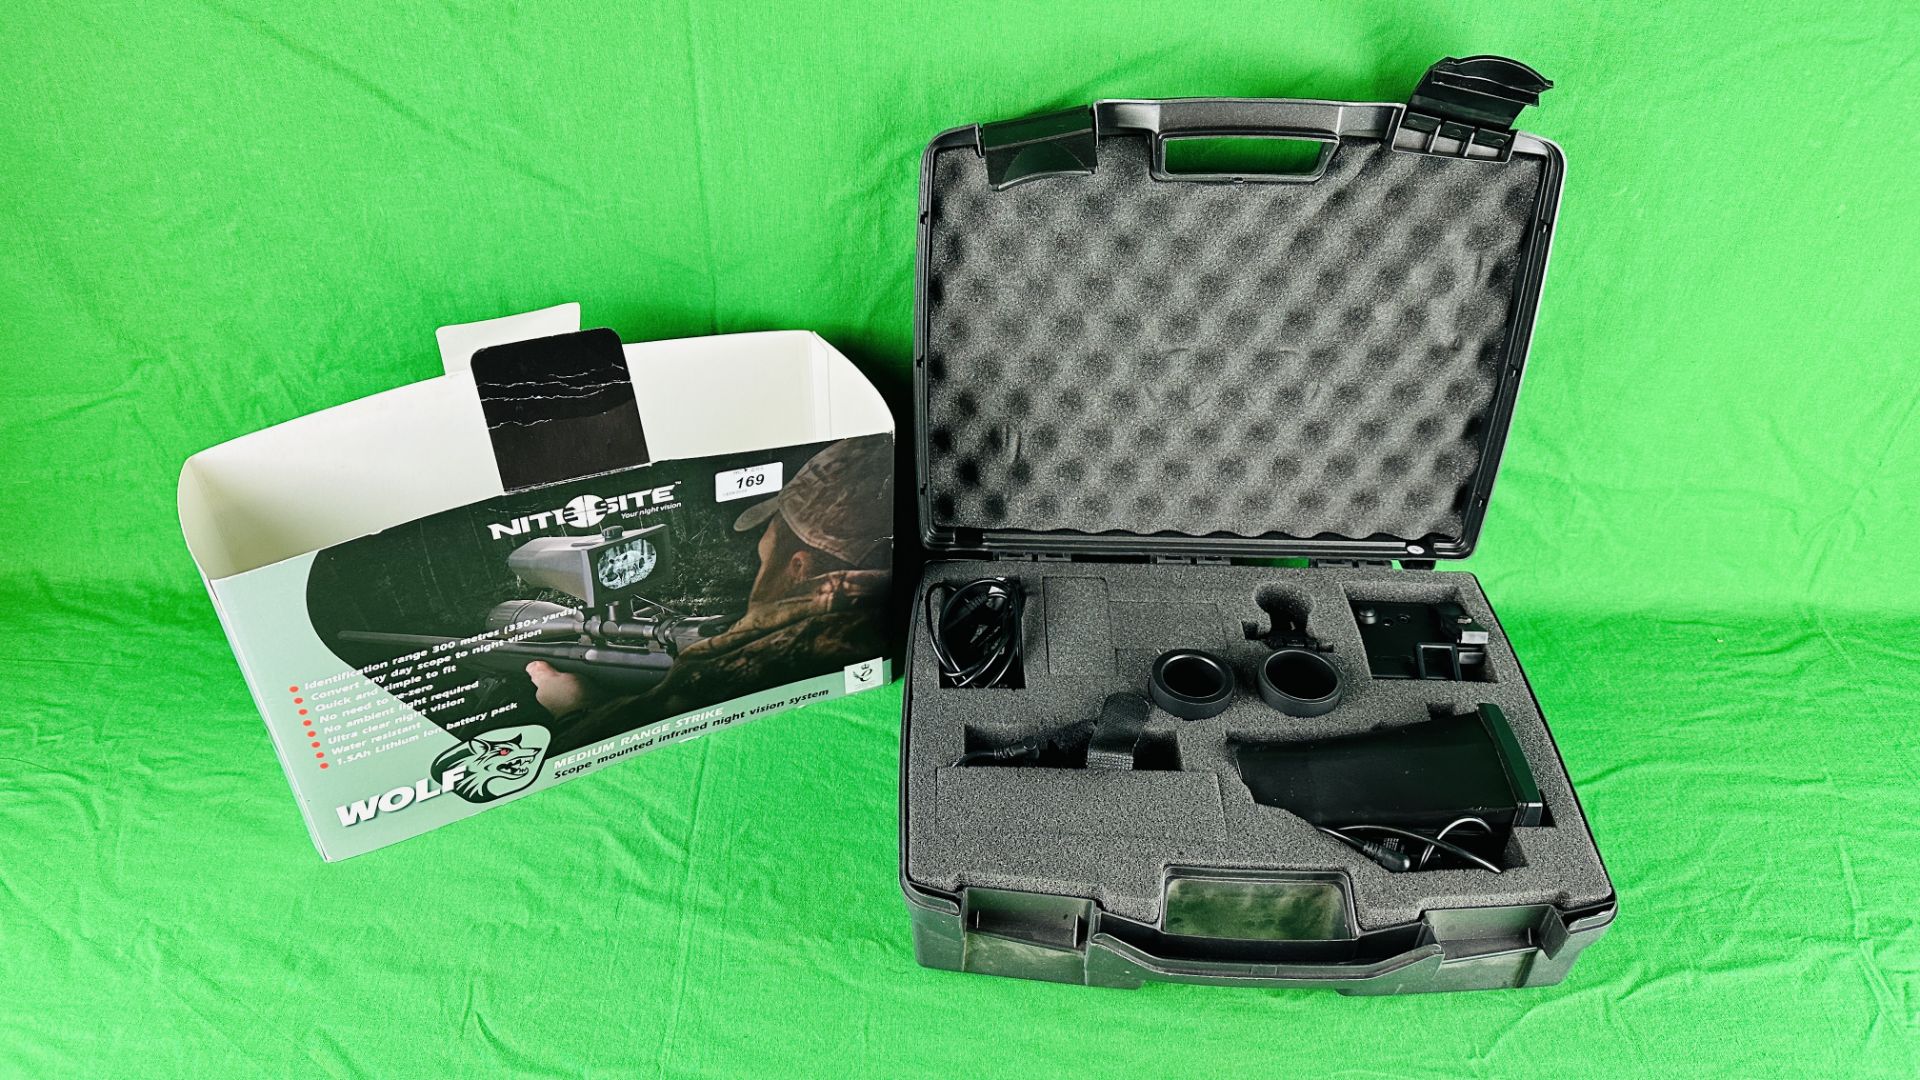 WOLF MEDIUM RANGE STRIKE SCOPE MOUNTED INFRARED NIGHT VISION SYSTEM IN CARRY CASE.